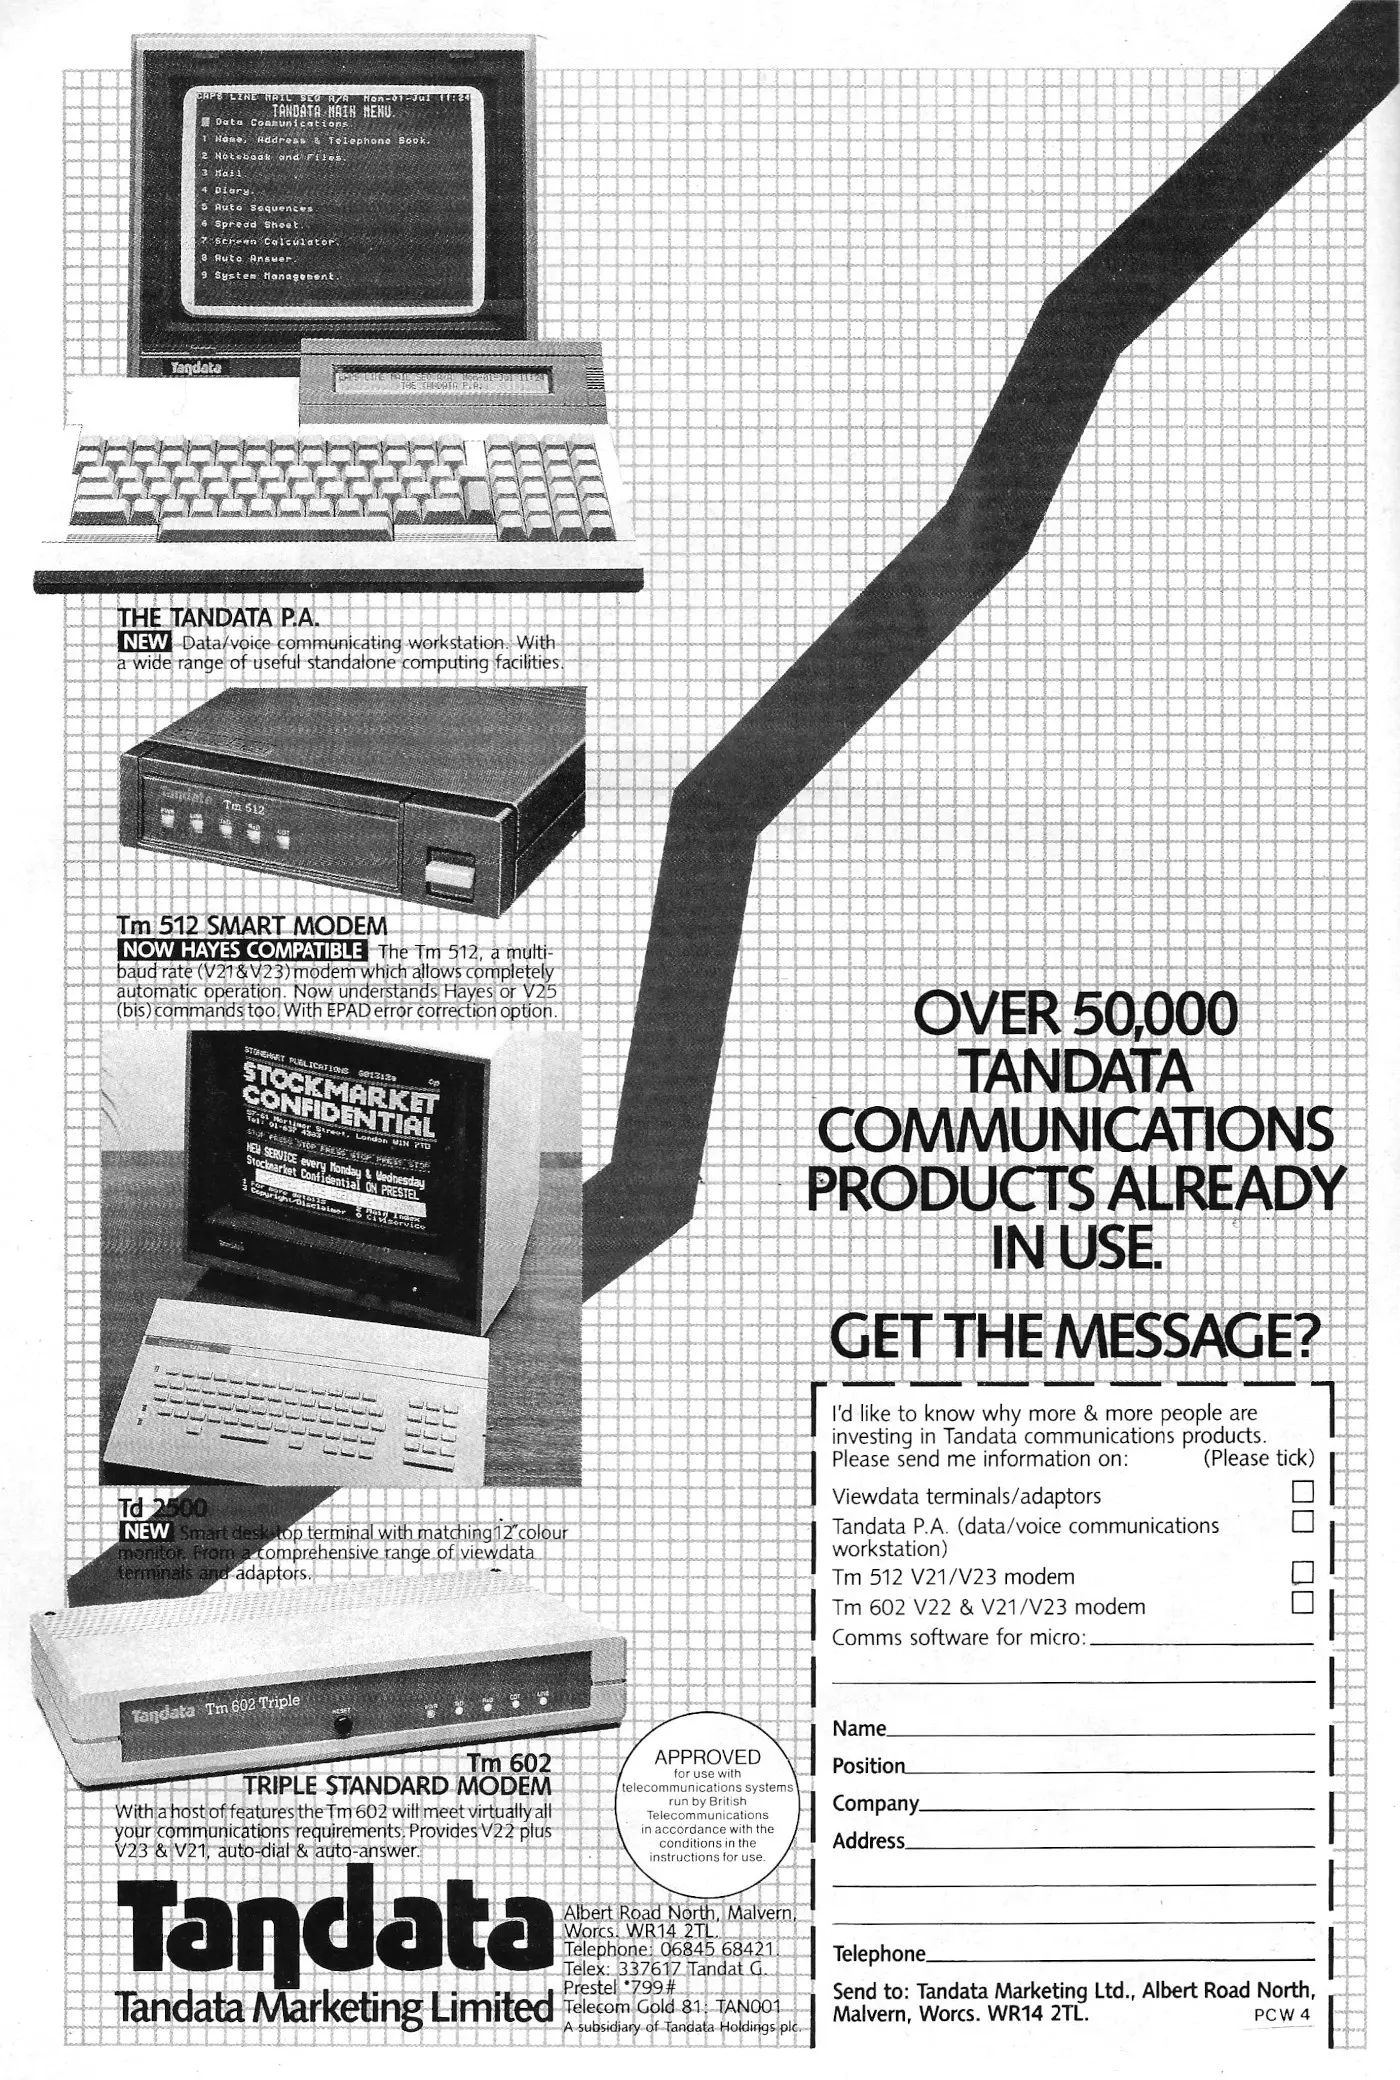 Tandata Advert: The Tandata PA - Data/voice communicating workstation, from Personal Computer World, March 1986